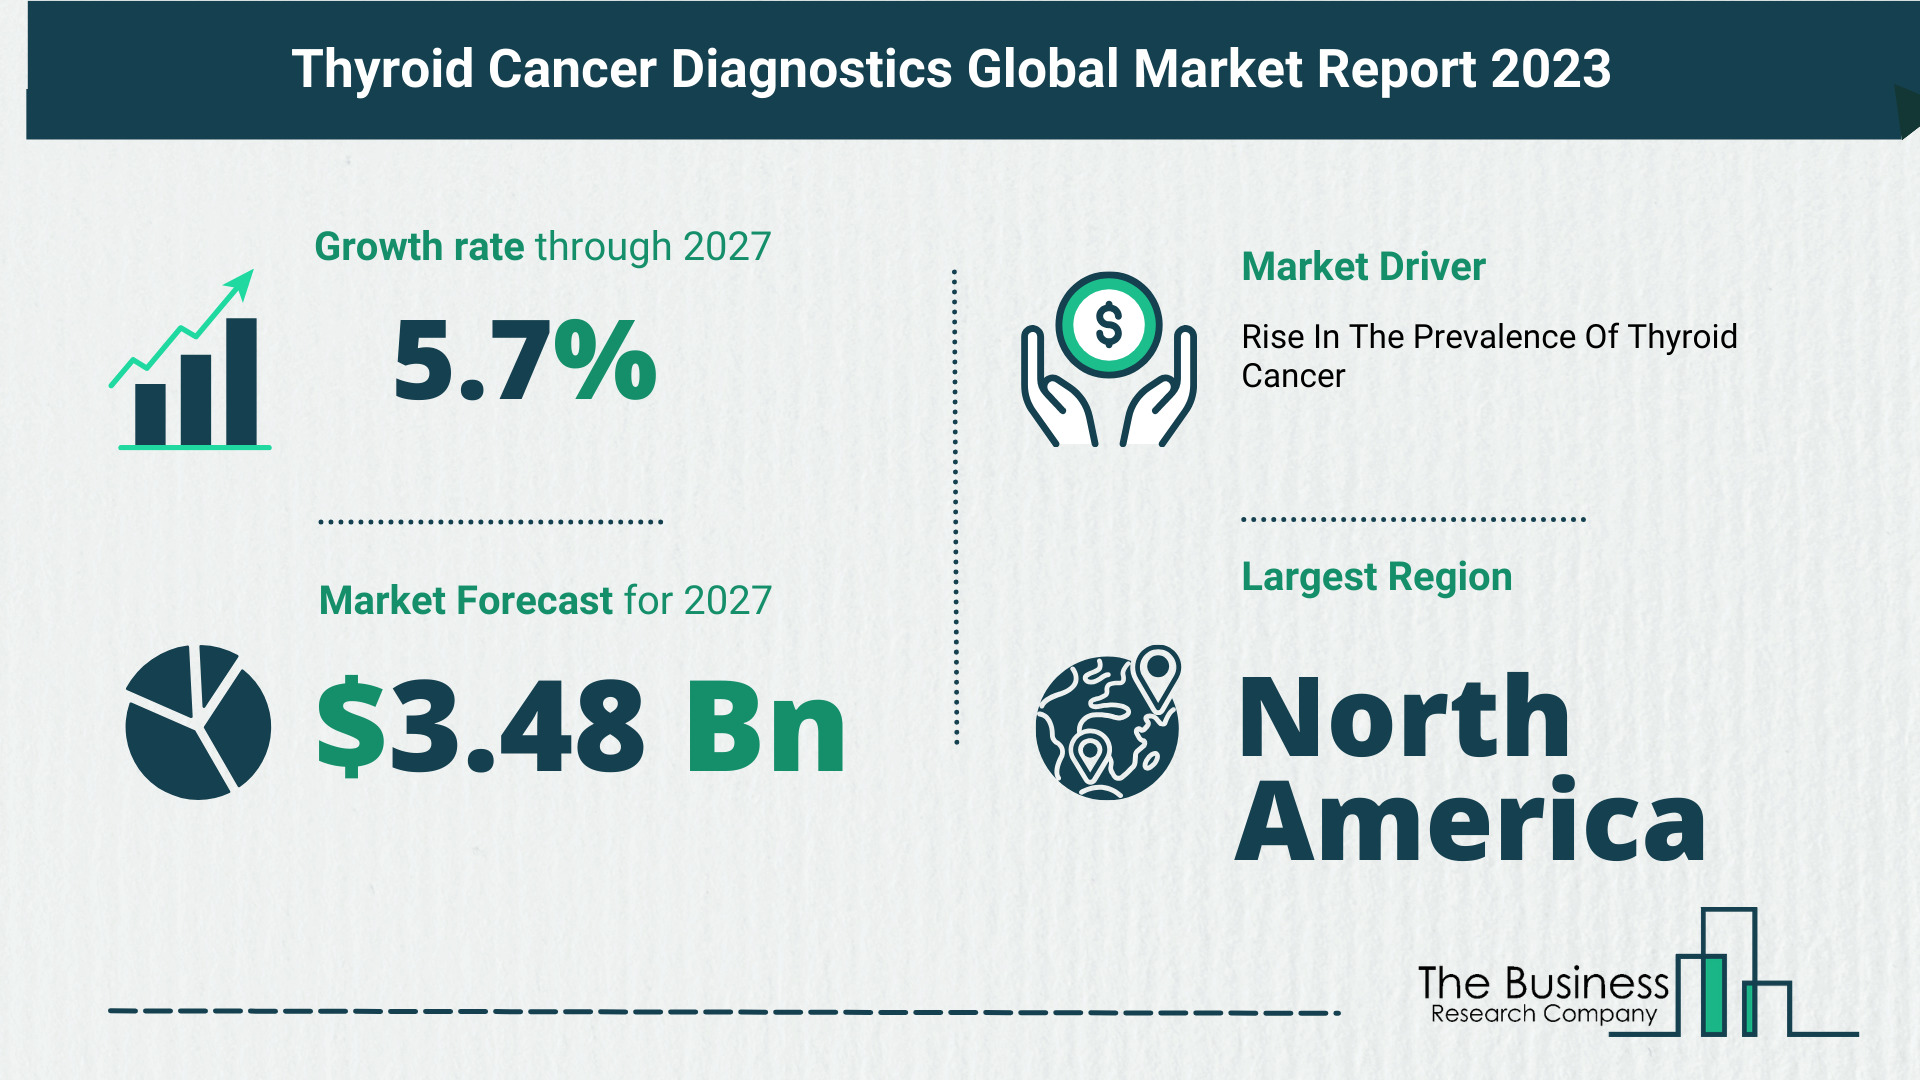 Global Thyroid Cancer Diagnostics Market Analysis: Estimated Market Size And Growth Rate